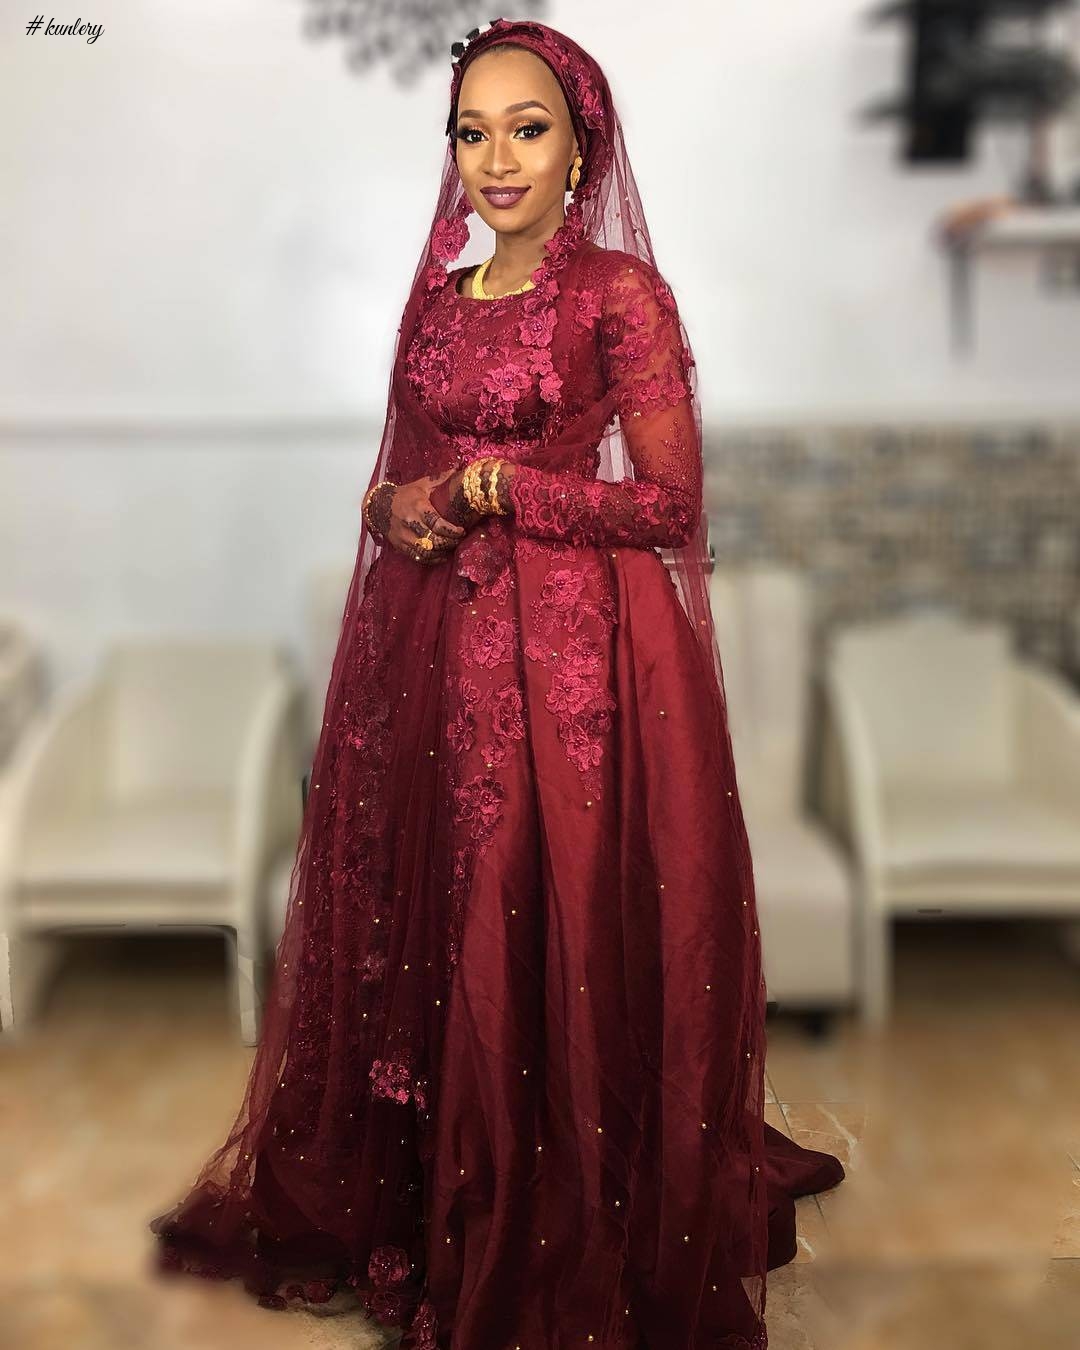 Muslim Brides Have Some Mouth Watering Wedding Dresses